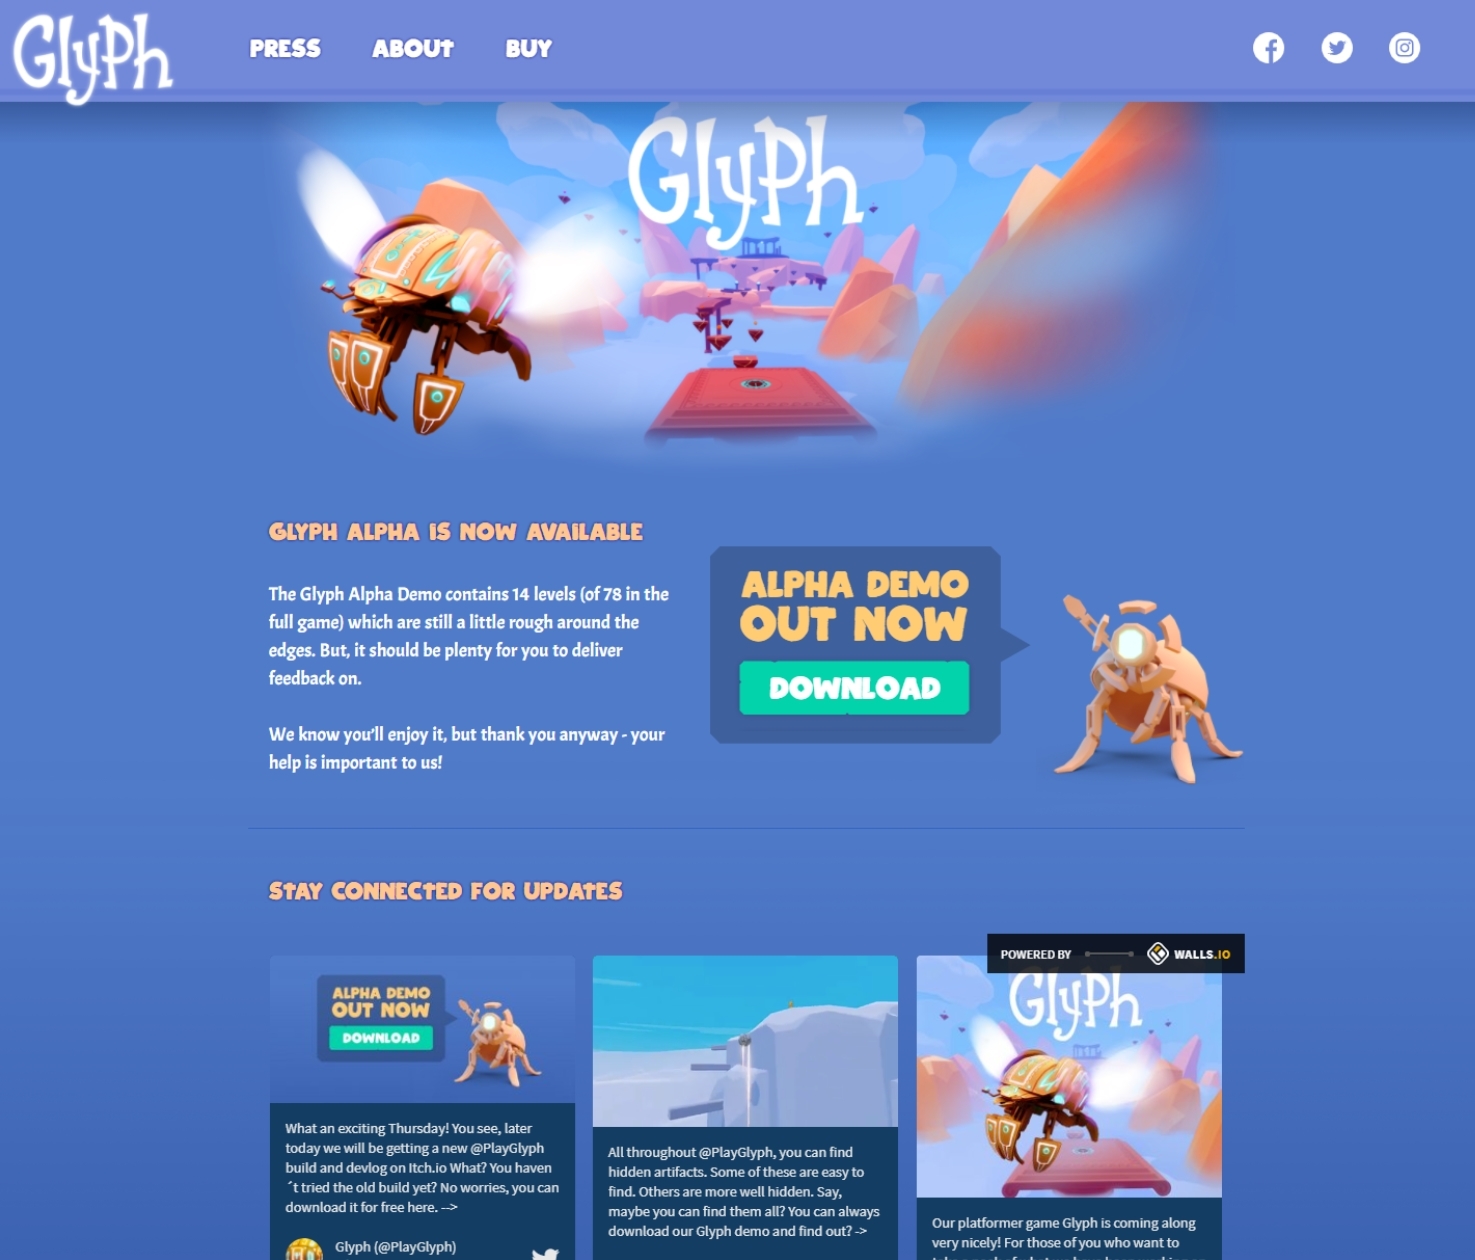 Glyph - New landing page